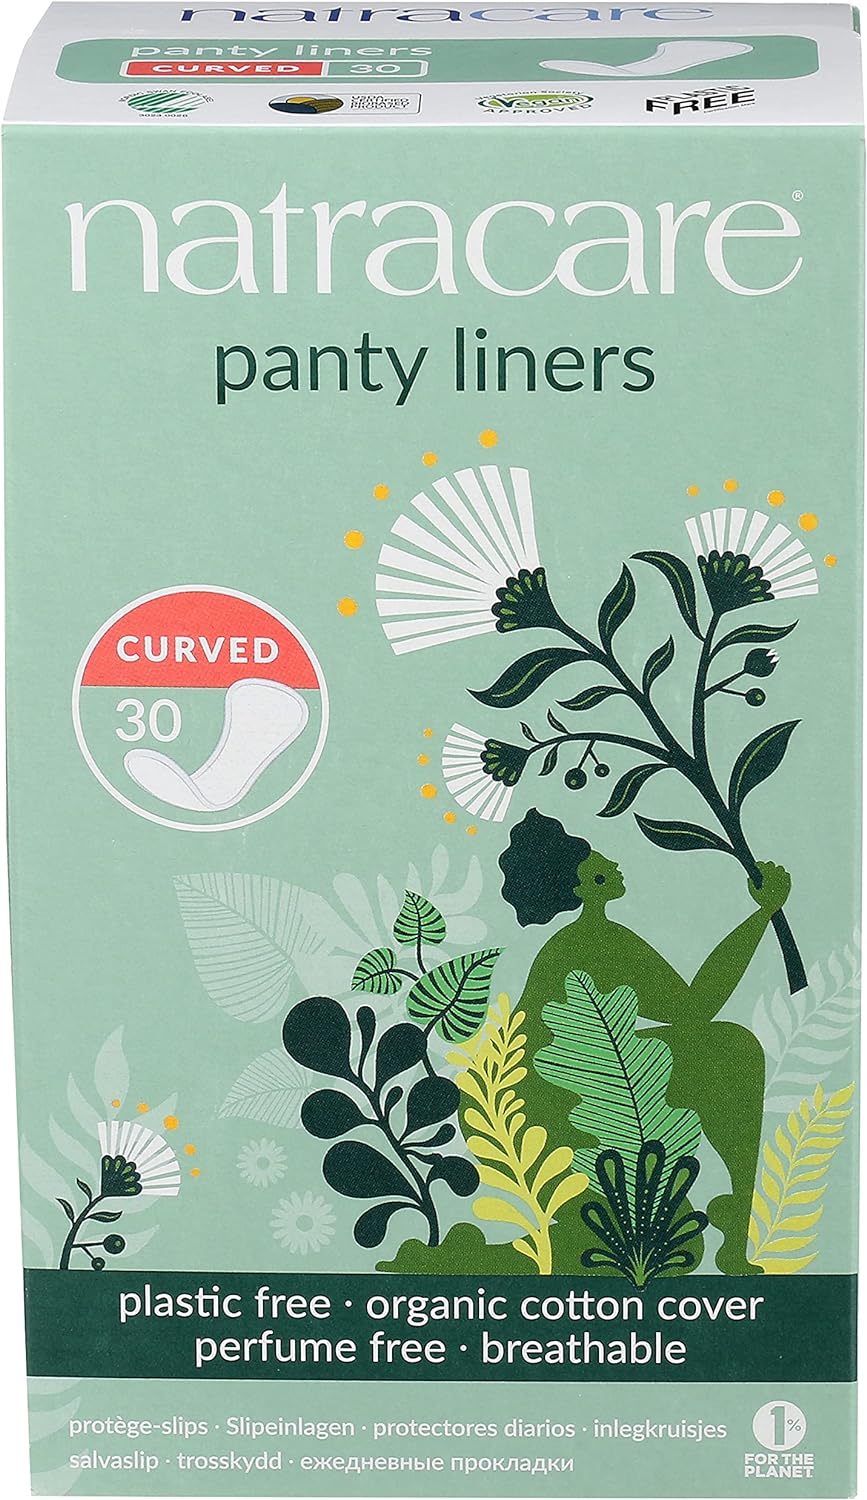 Natracare Natural Organic Cotton Curved Panty Liners for Sensitive Skin, Shaped for Extraordinary Everyday Comfort, 30 Liners Per Box (Pack of 16 Boxes, 480 Liners Total)